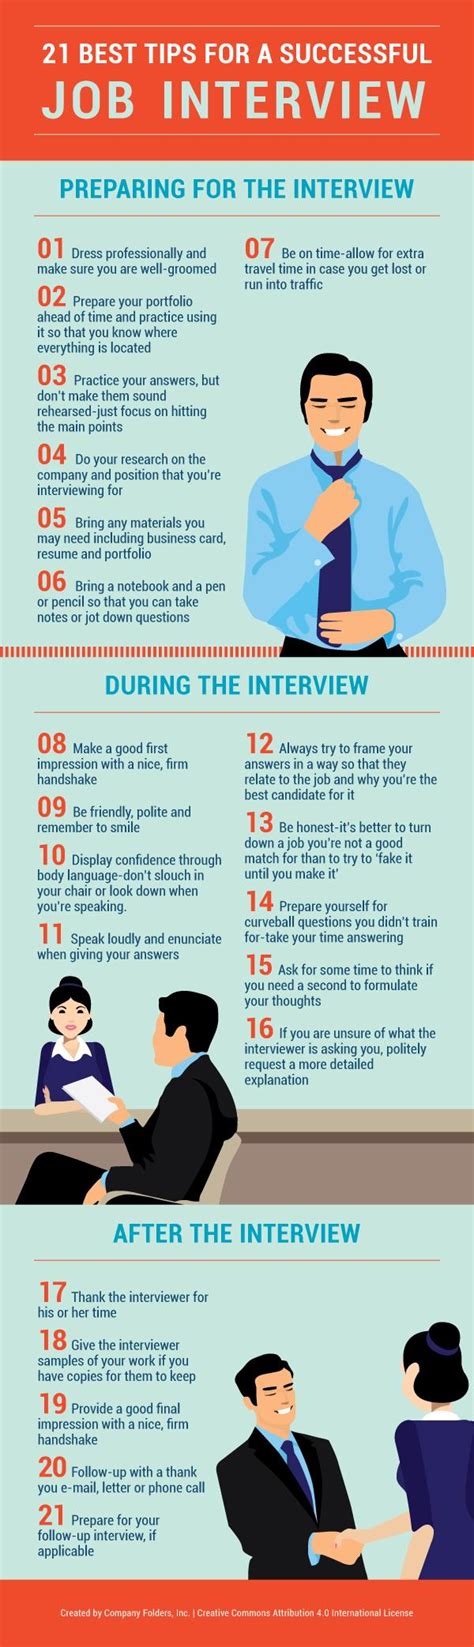 What makes you reject an interview invitation? Job Interviews: How To Prepare for Every Step of the Process